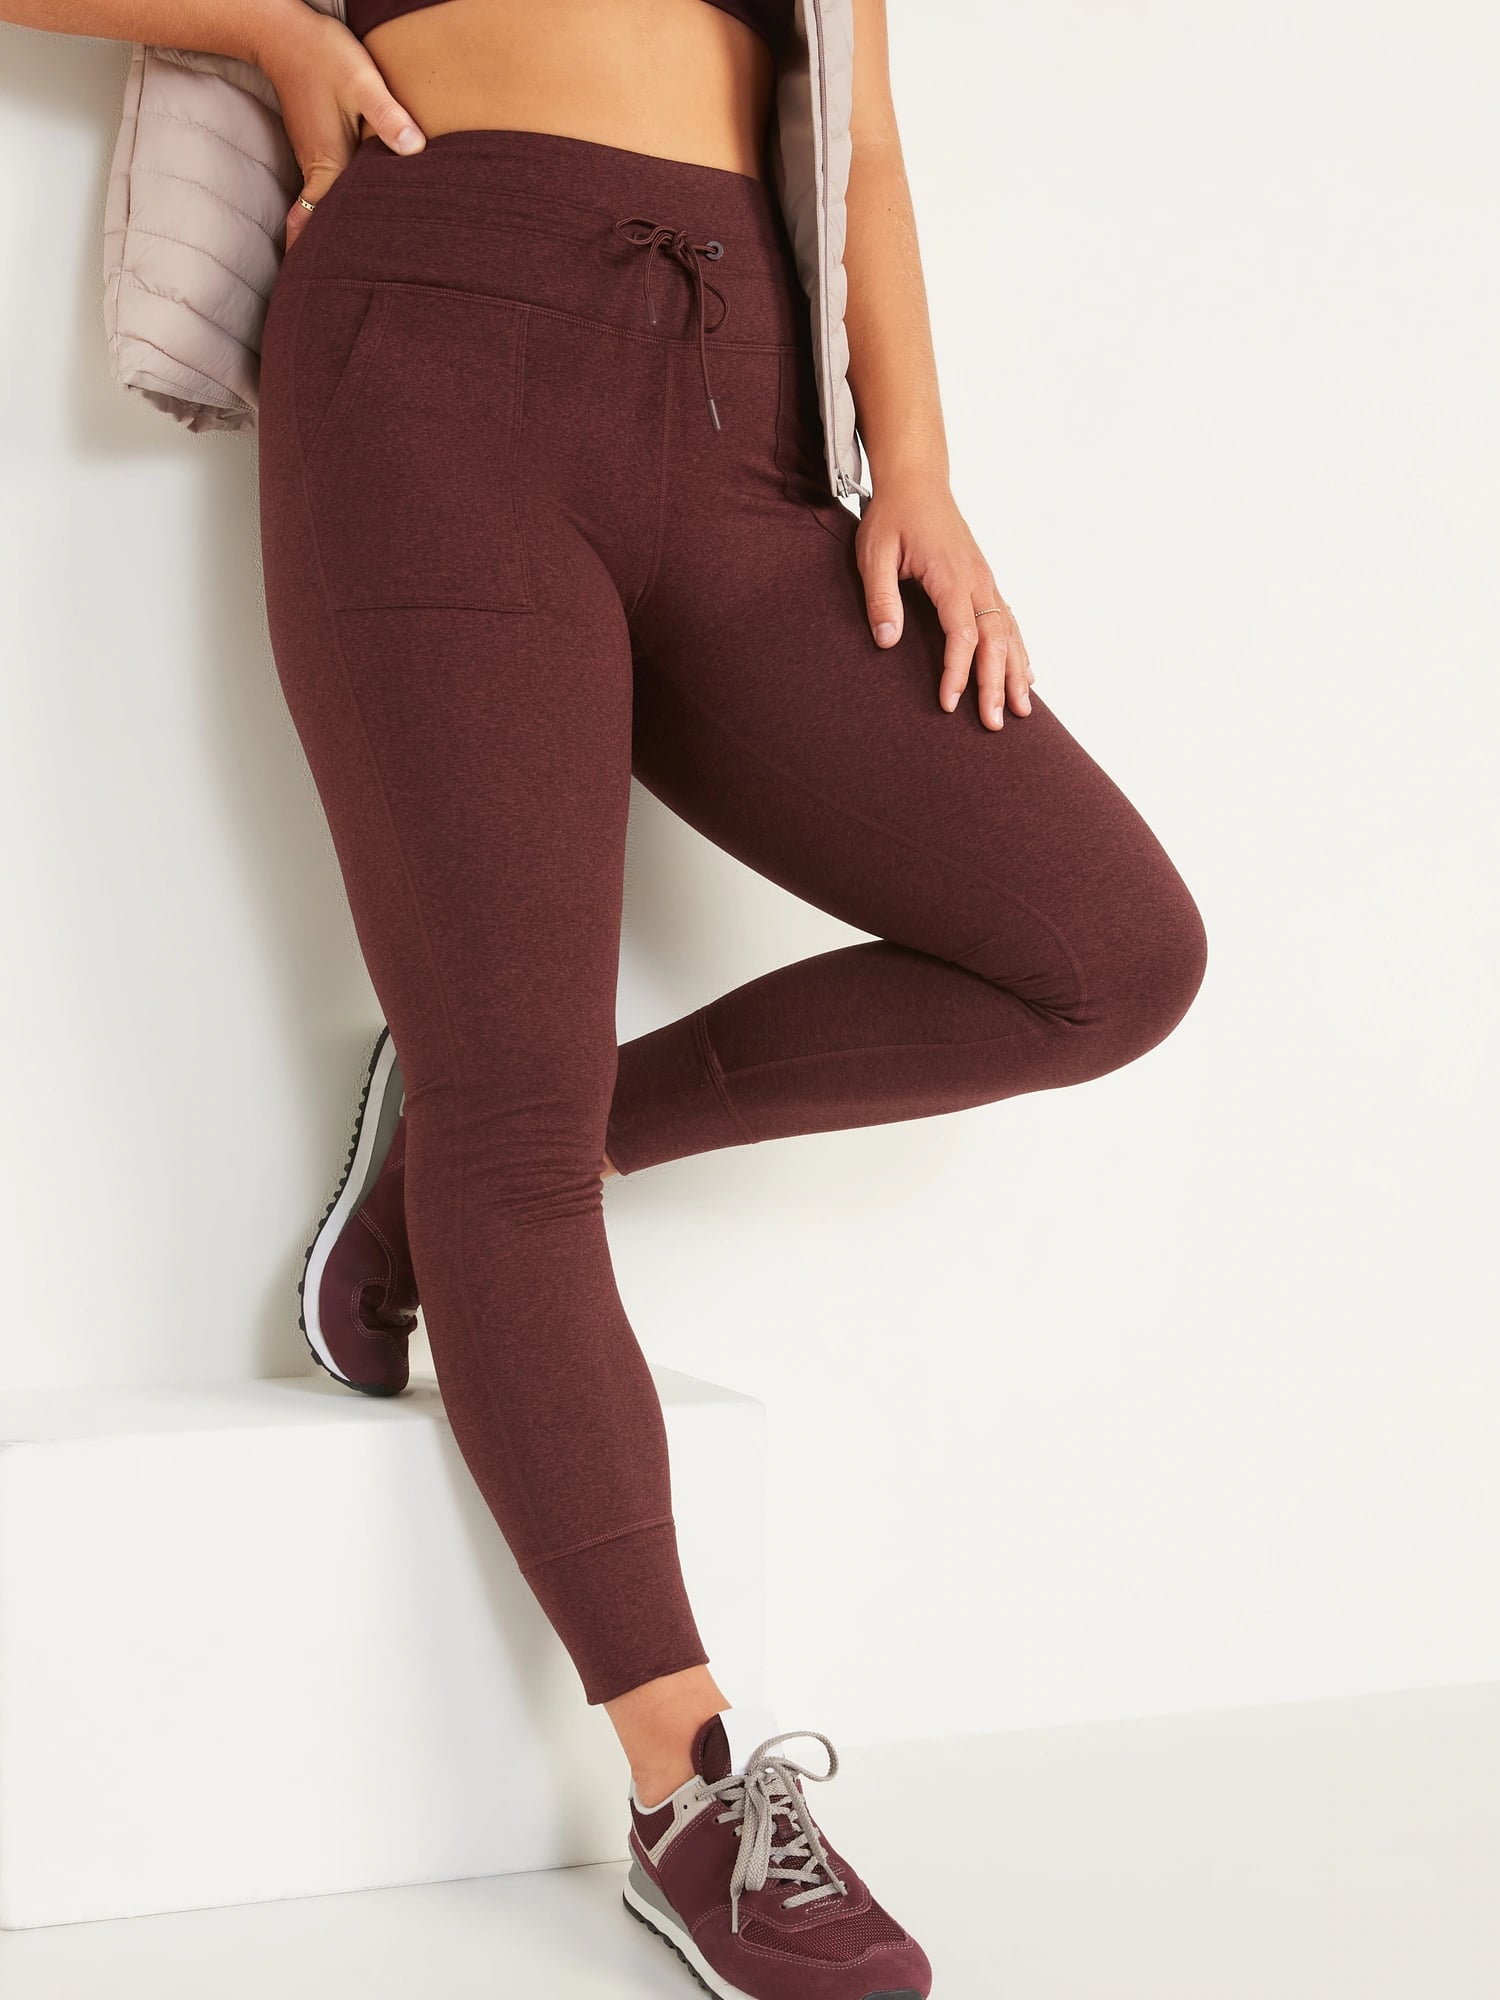 Old Navy High-Waisted PowerSoft Leggings I Editor Review